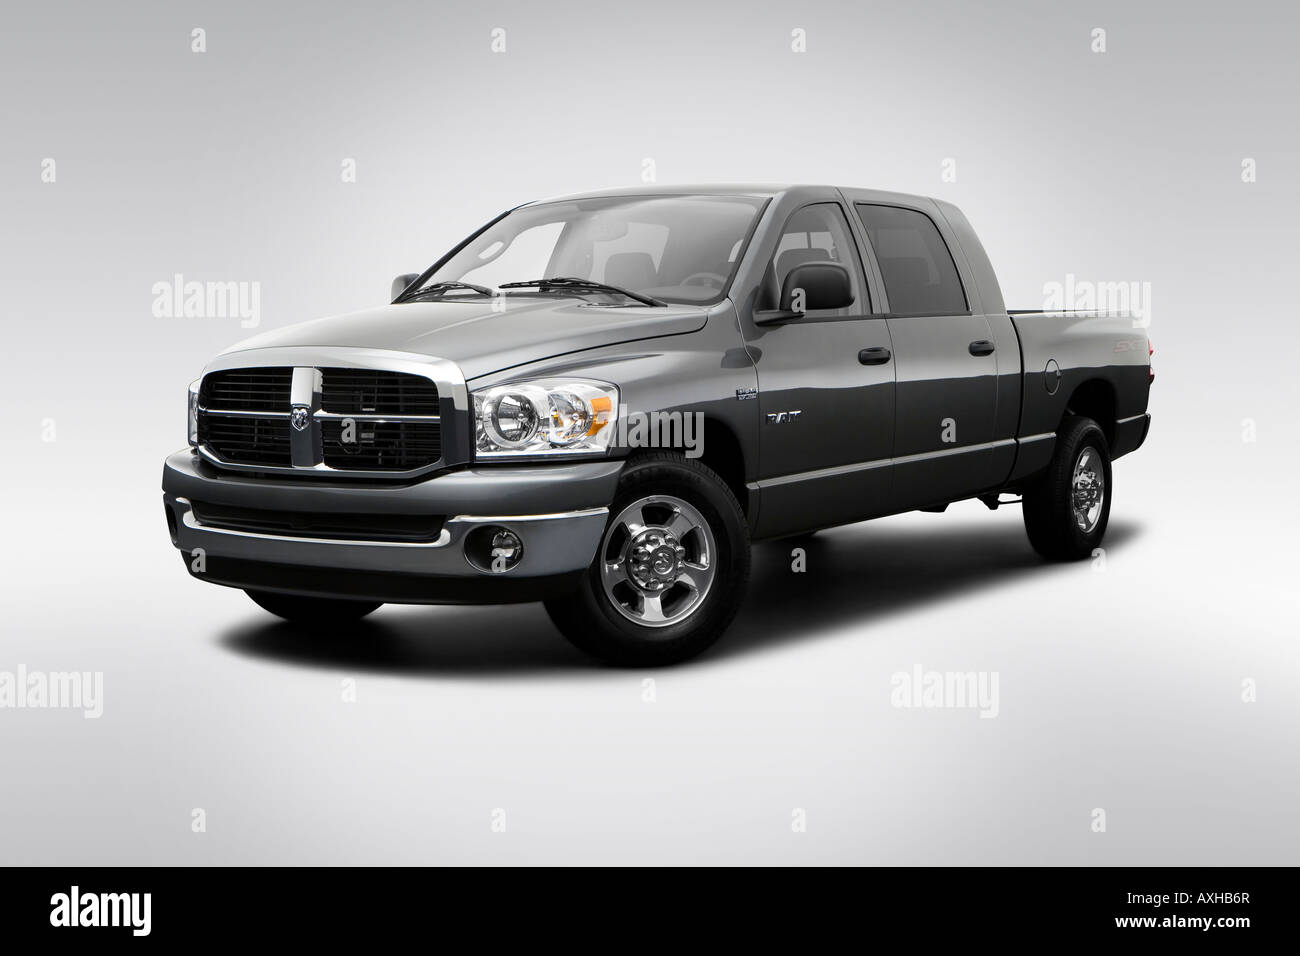 2008 Dodge Ram 1500 SLT in Gray - Front angle view Stock Photo - Alamy